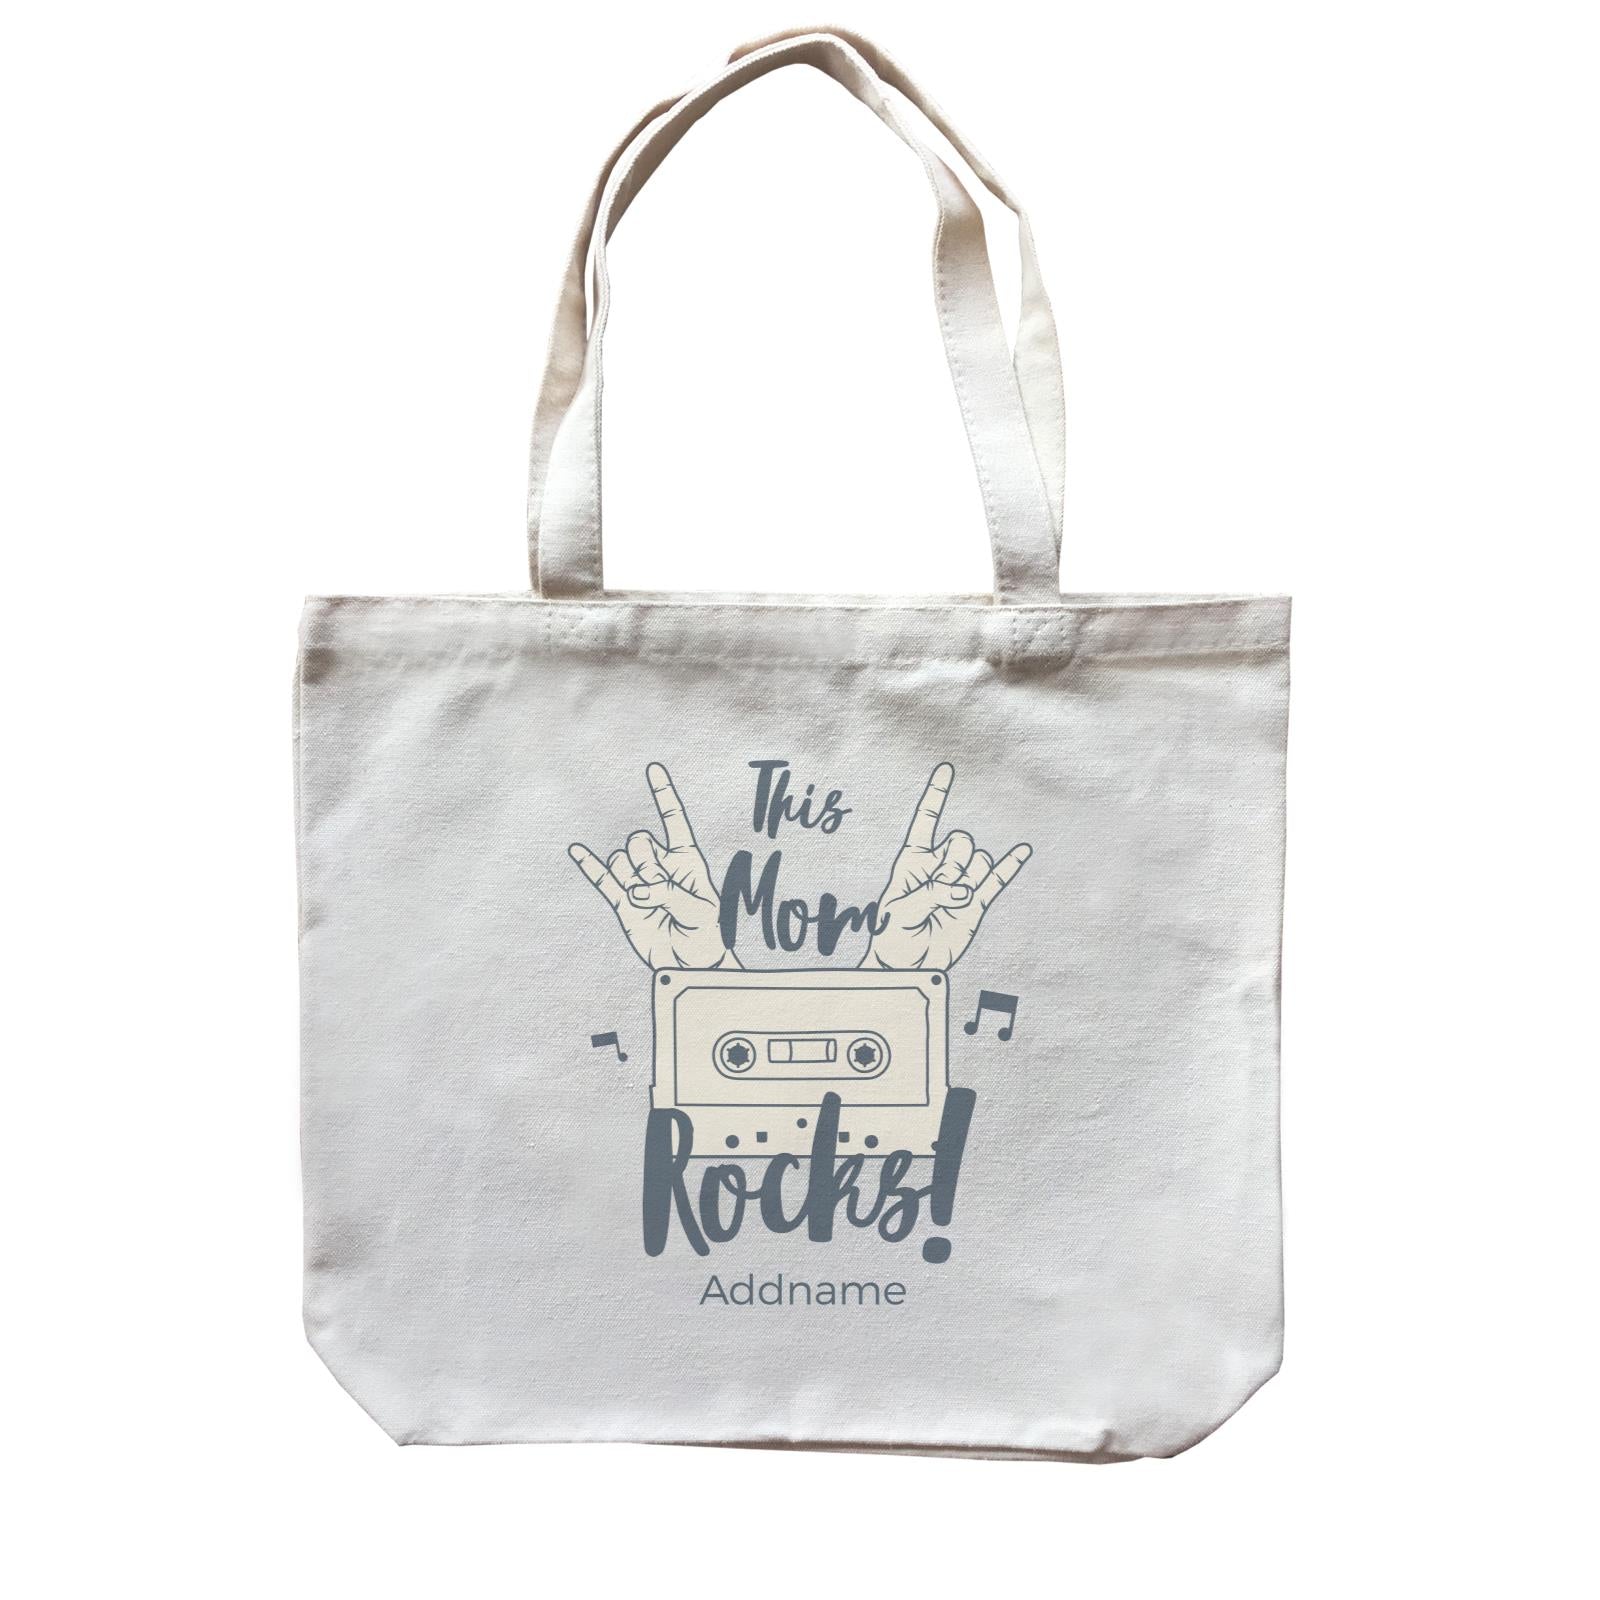 Awesome Mom 1 This Mom Rocks! Cassette Addname Canvas Bag